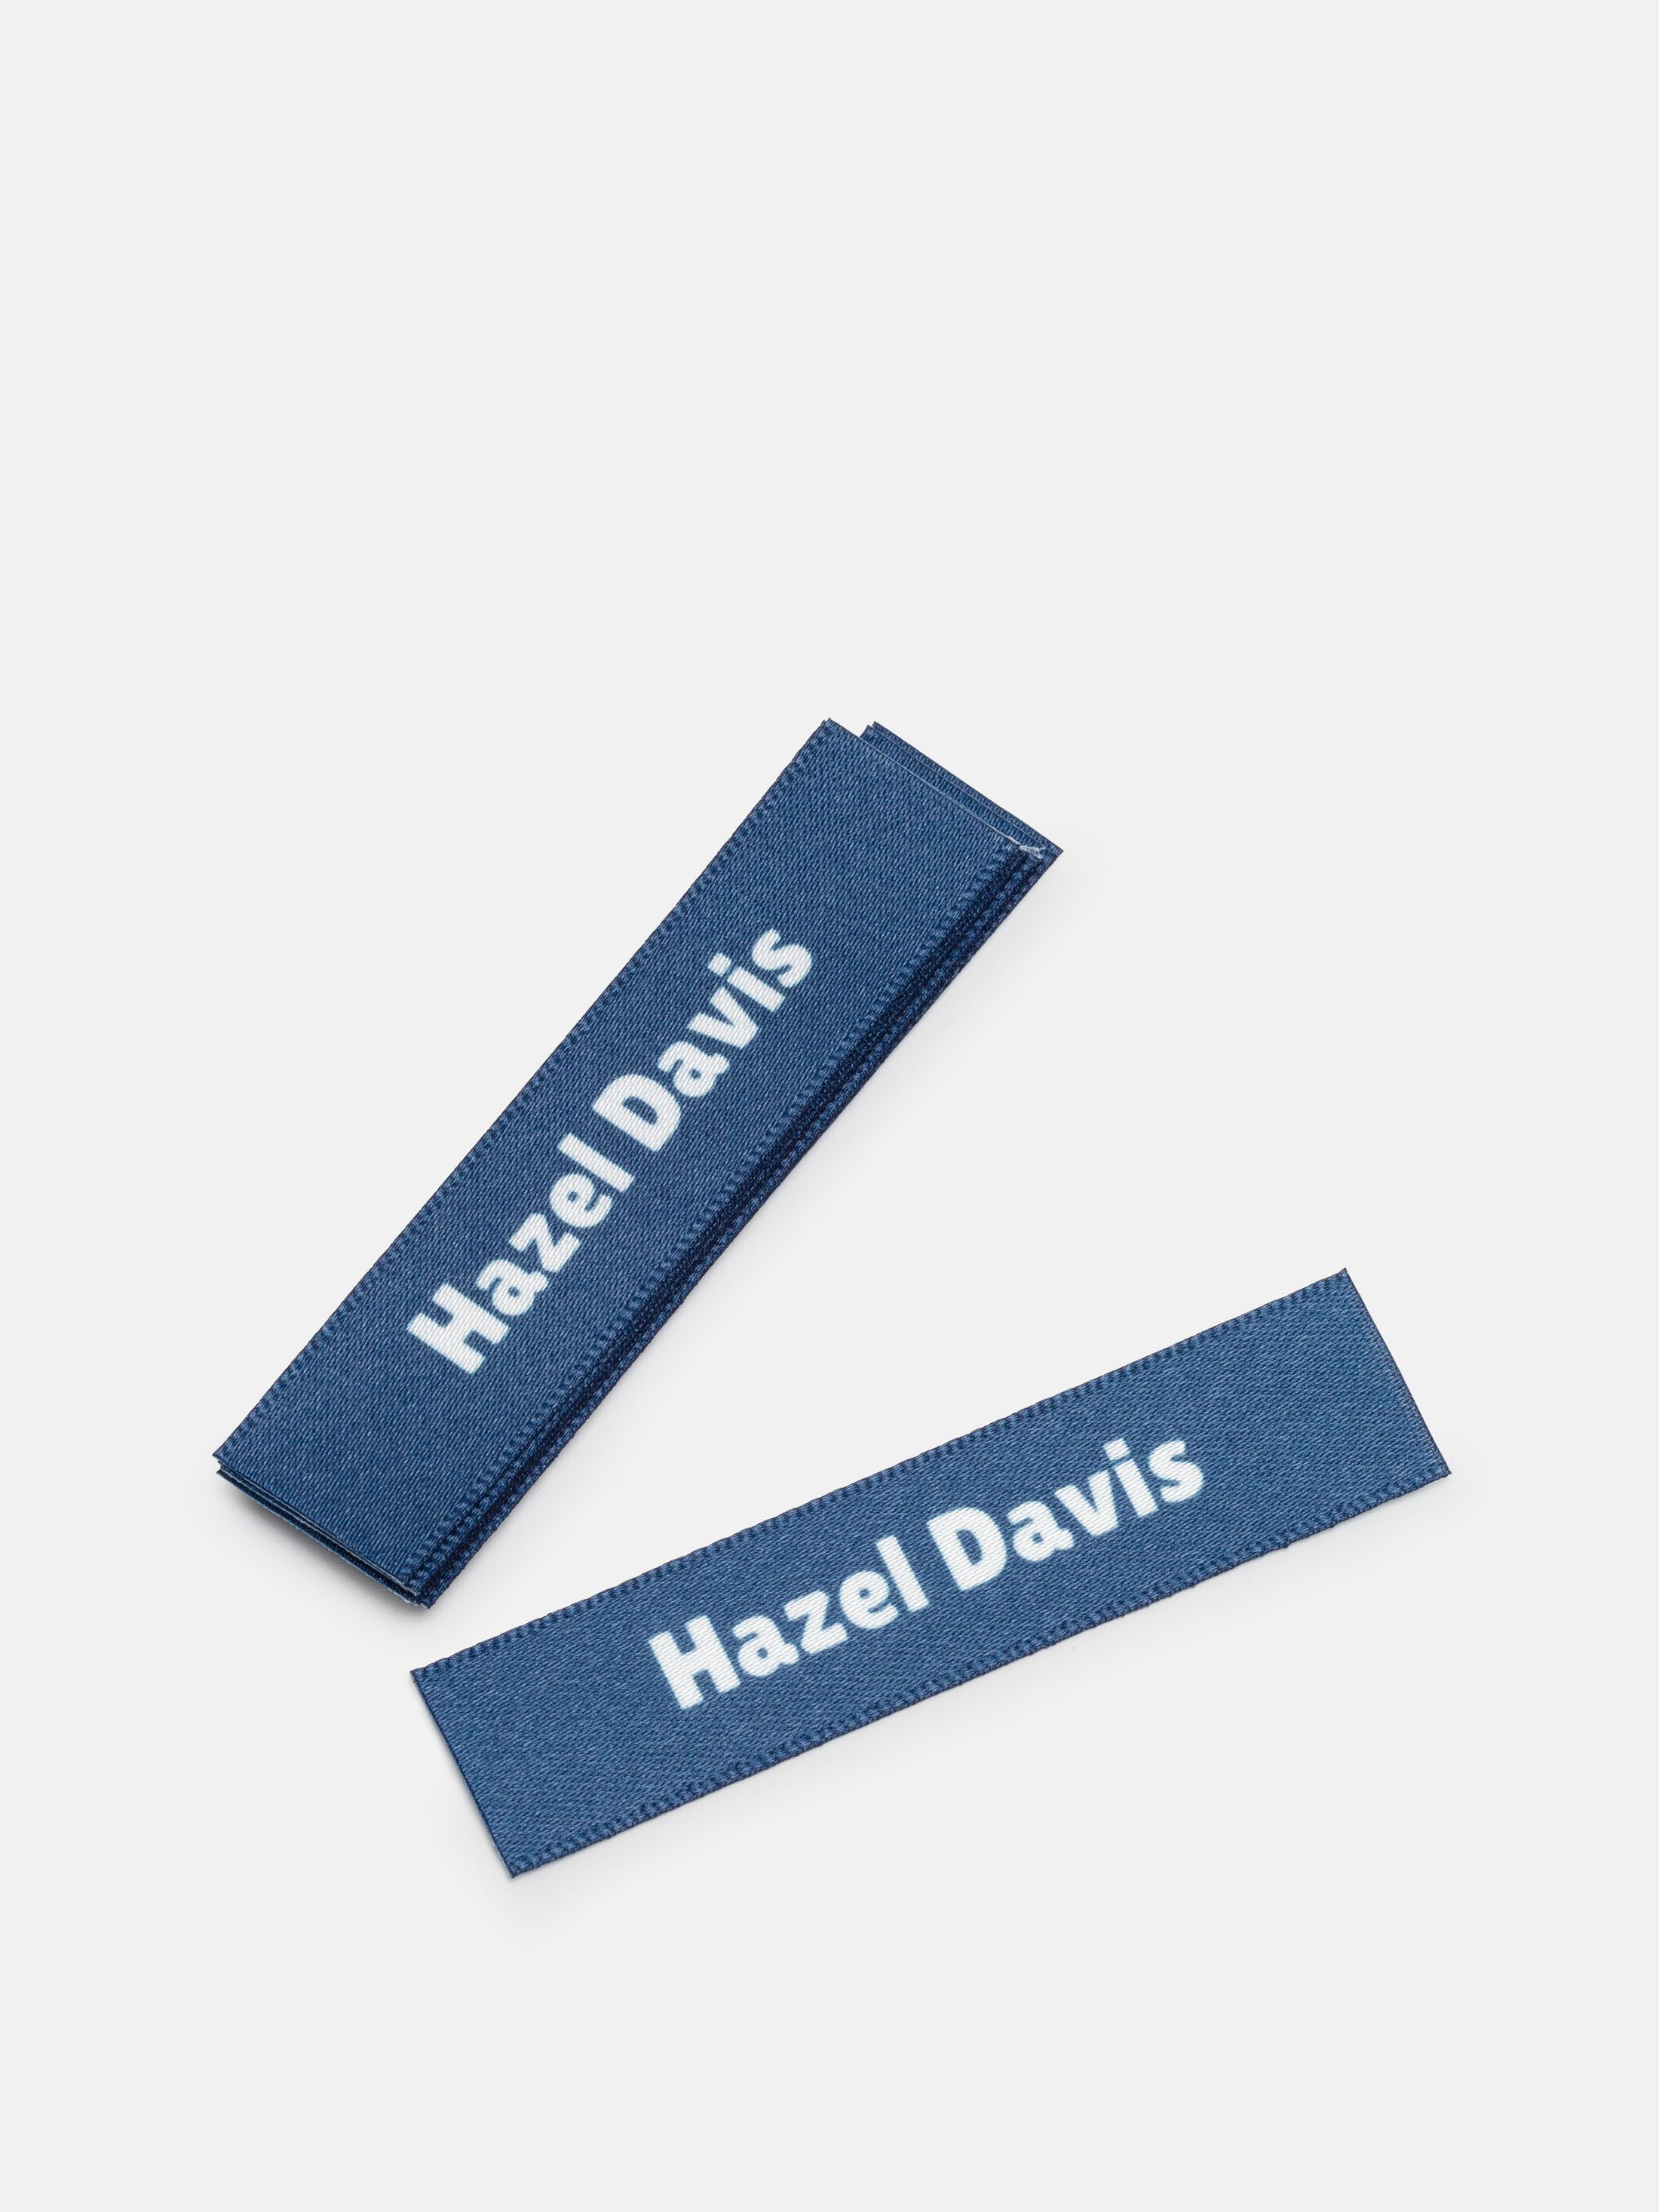 clothing labels for school uniforms navy blue